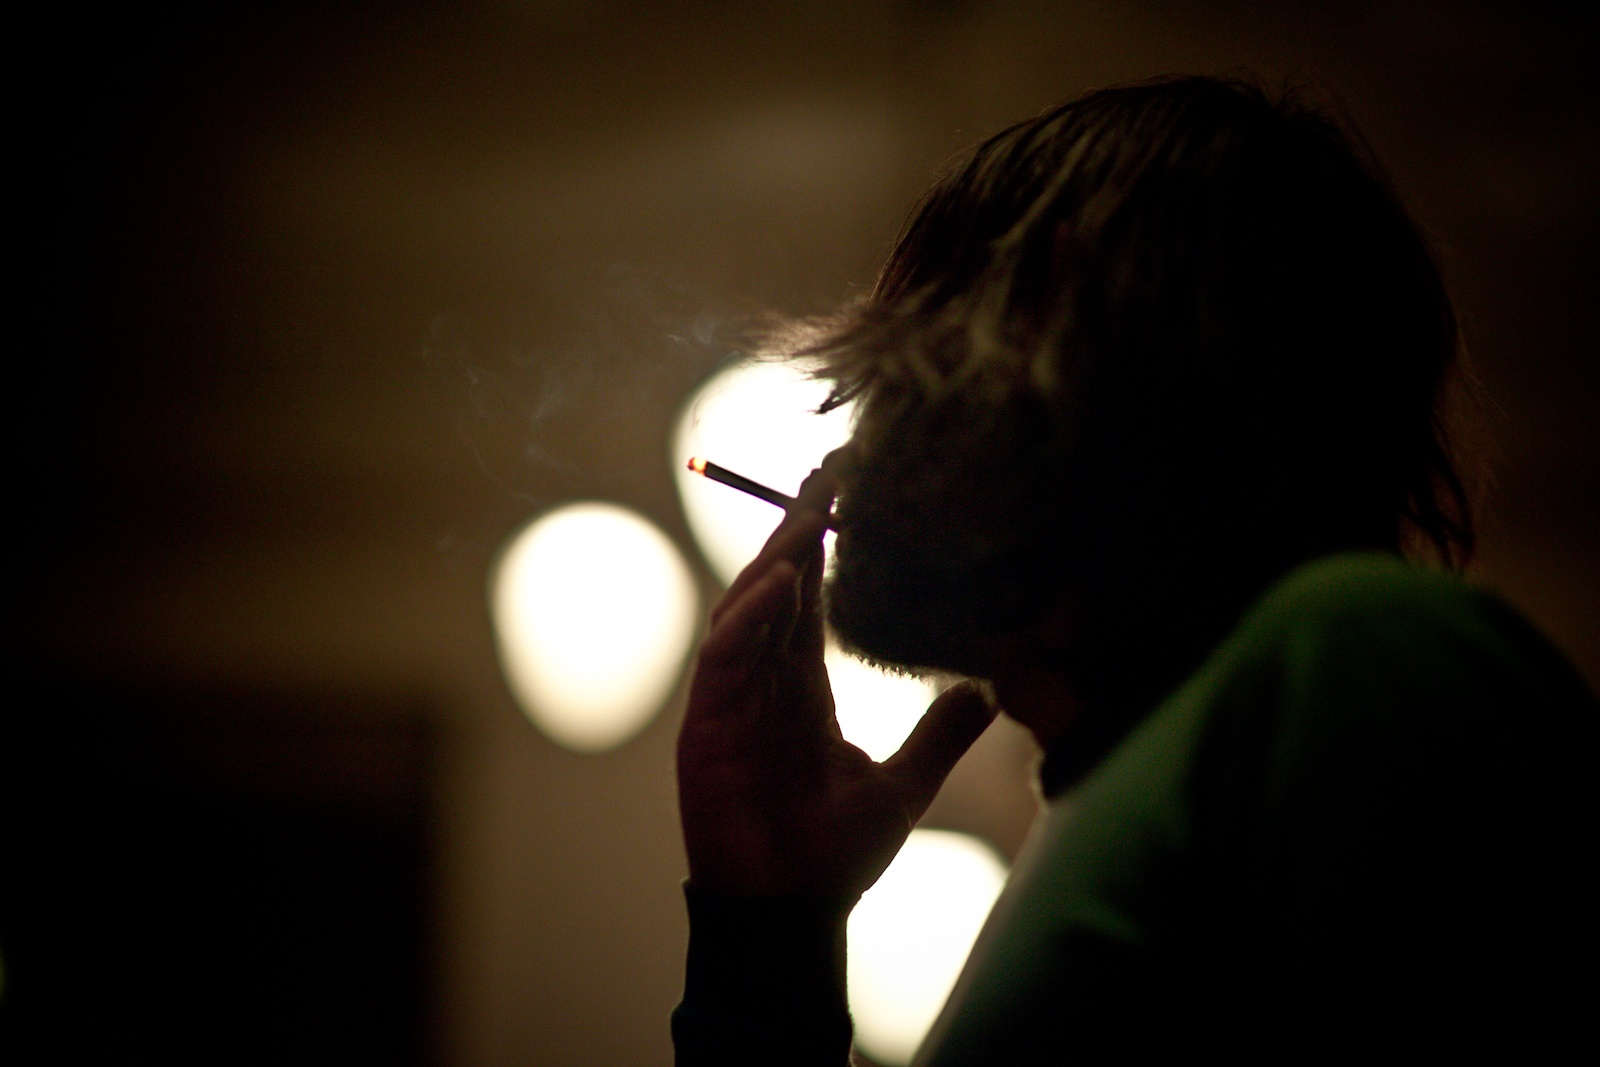 a man smokes his cigarette in a dimly lit room